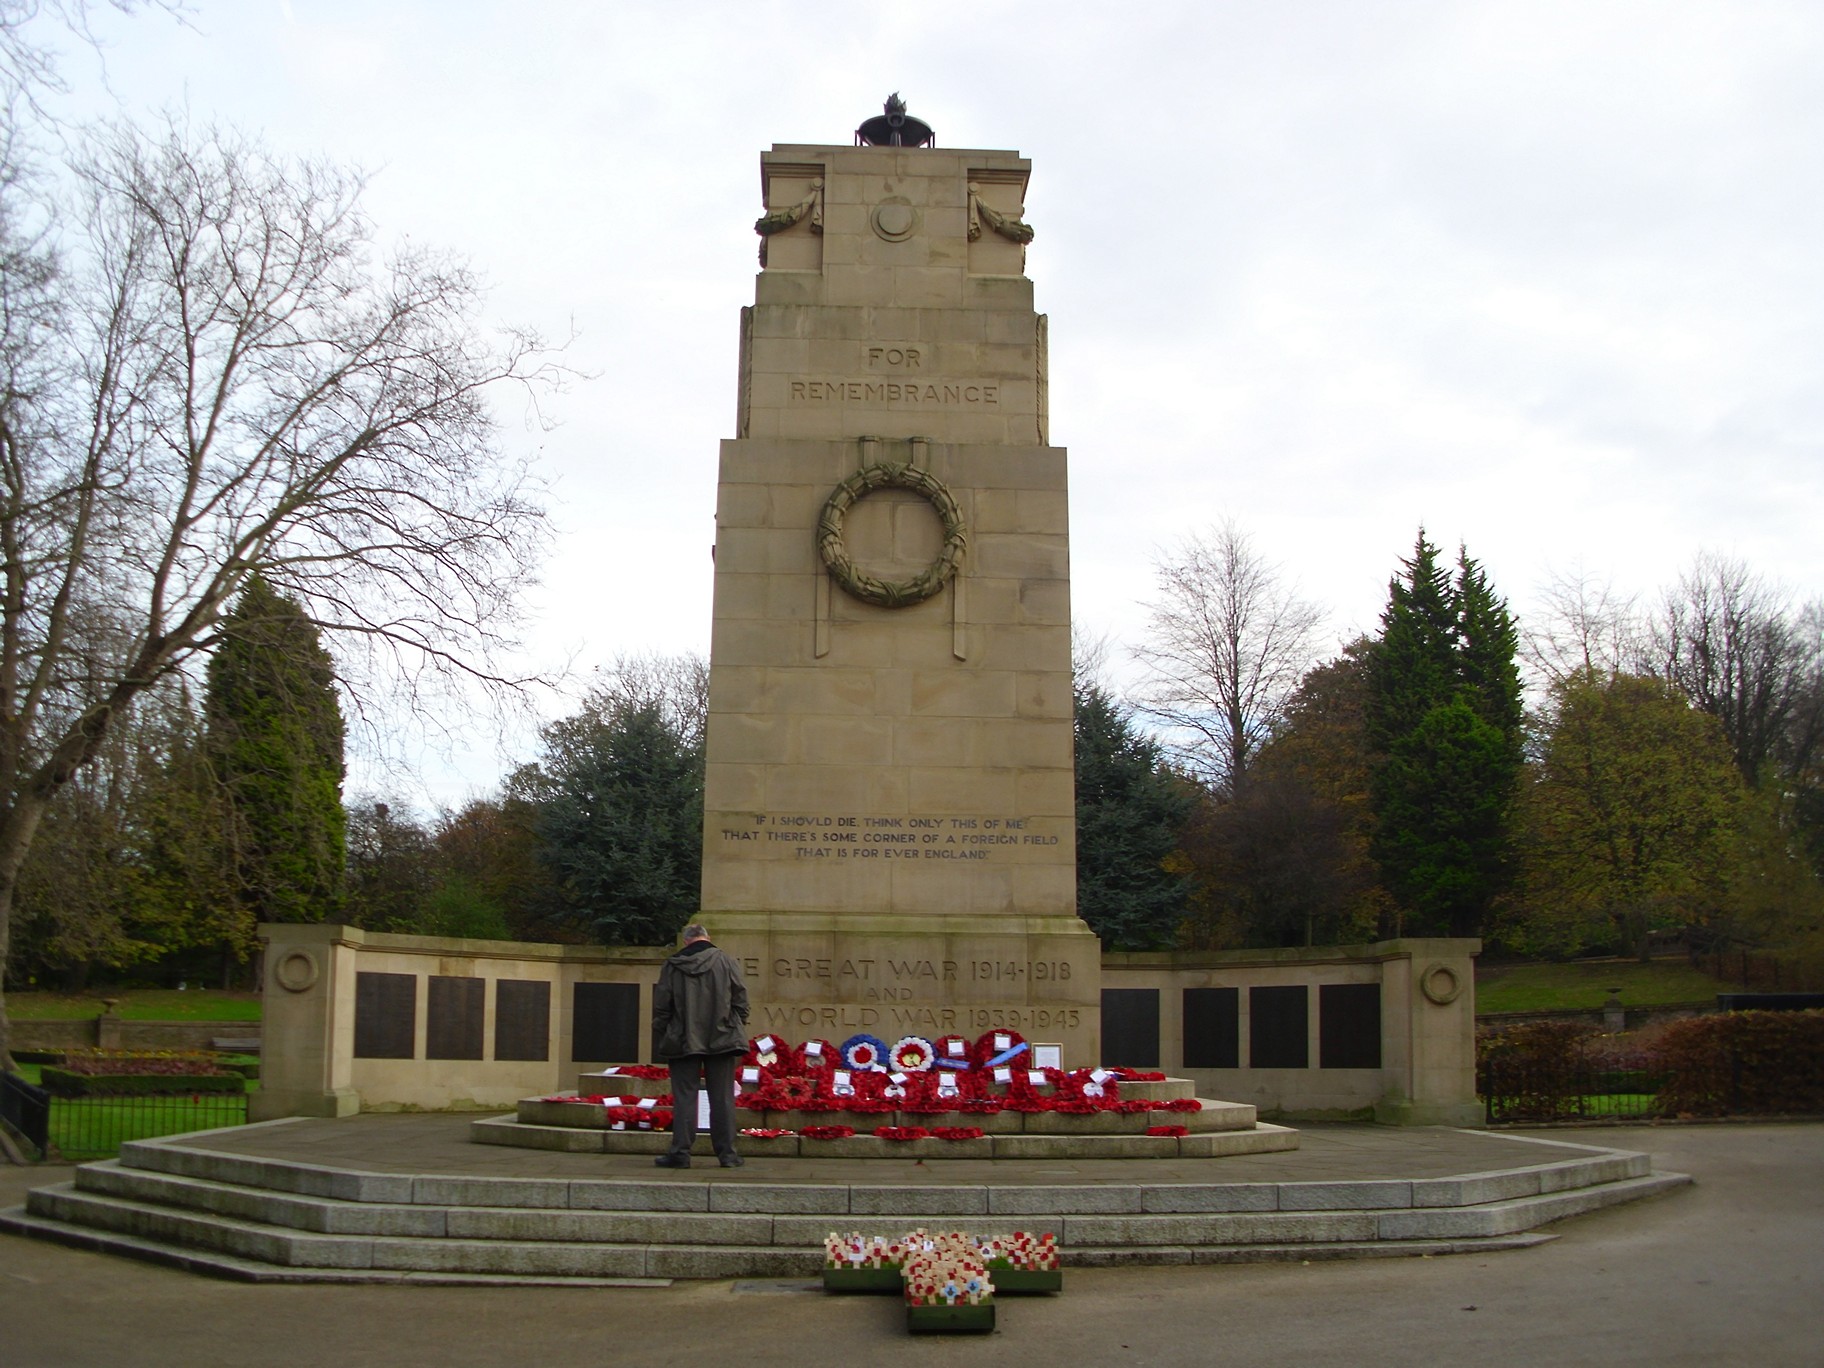 a monument has been decorated with red and white flowers